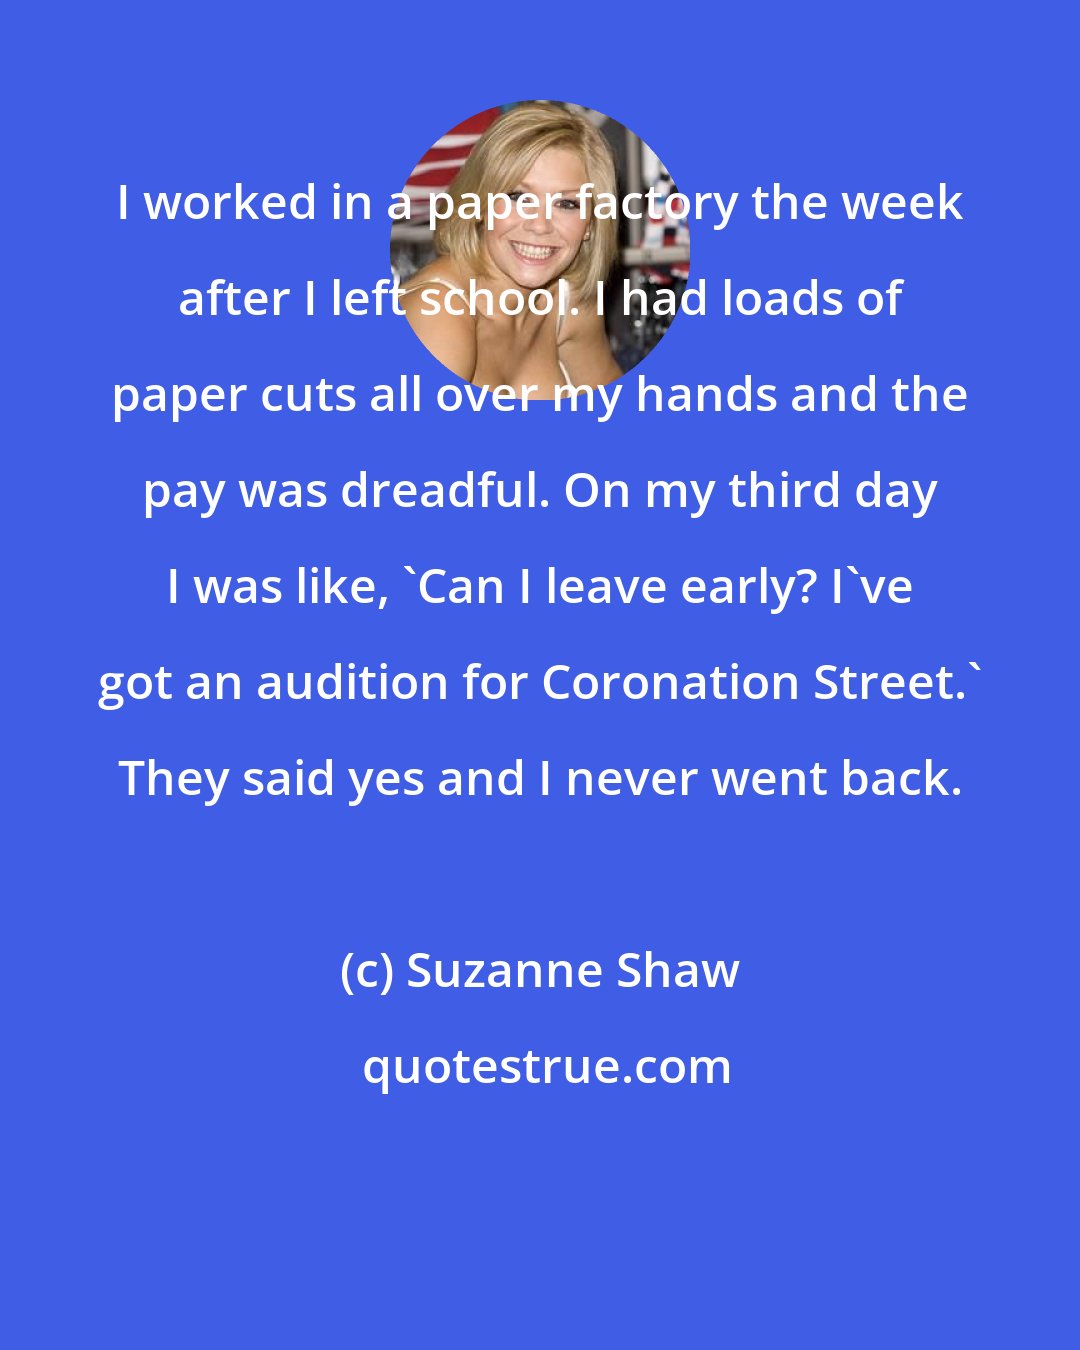 Suzanne Shaw: I worked in a paper factory the week after I left school. I had loads of paper cuts all over my hands and the pay was dreadful. On my third day I was like, 'Can I leave early? I've got an audition for Coronation Street.' They said yes and I never went back.